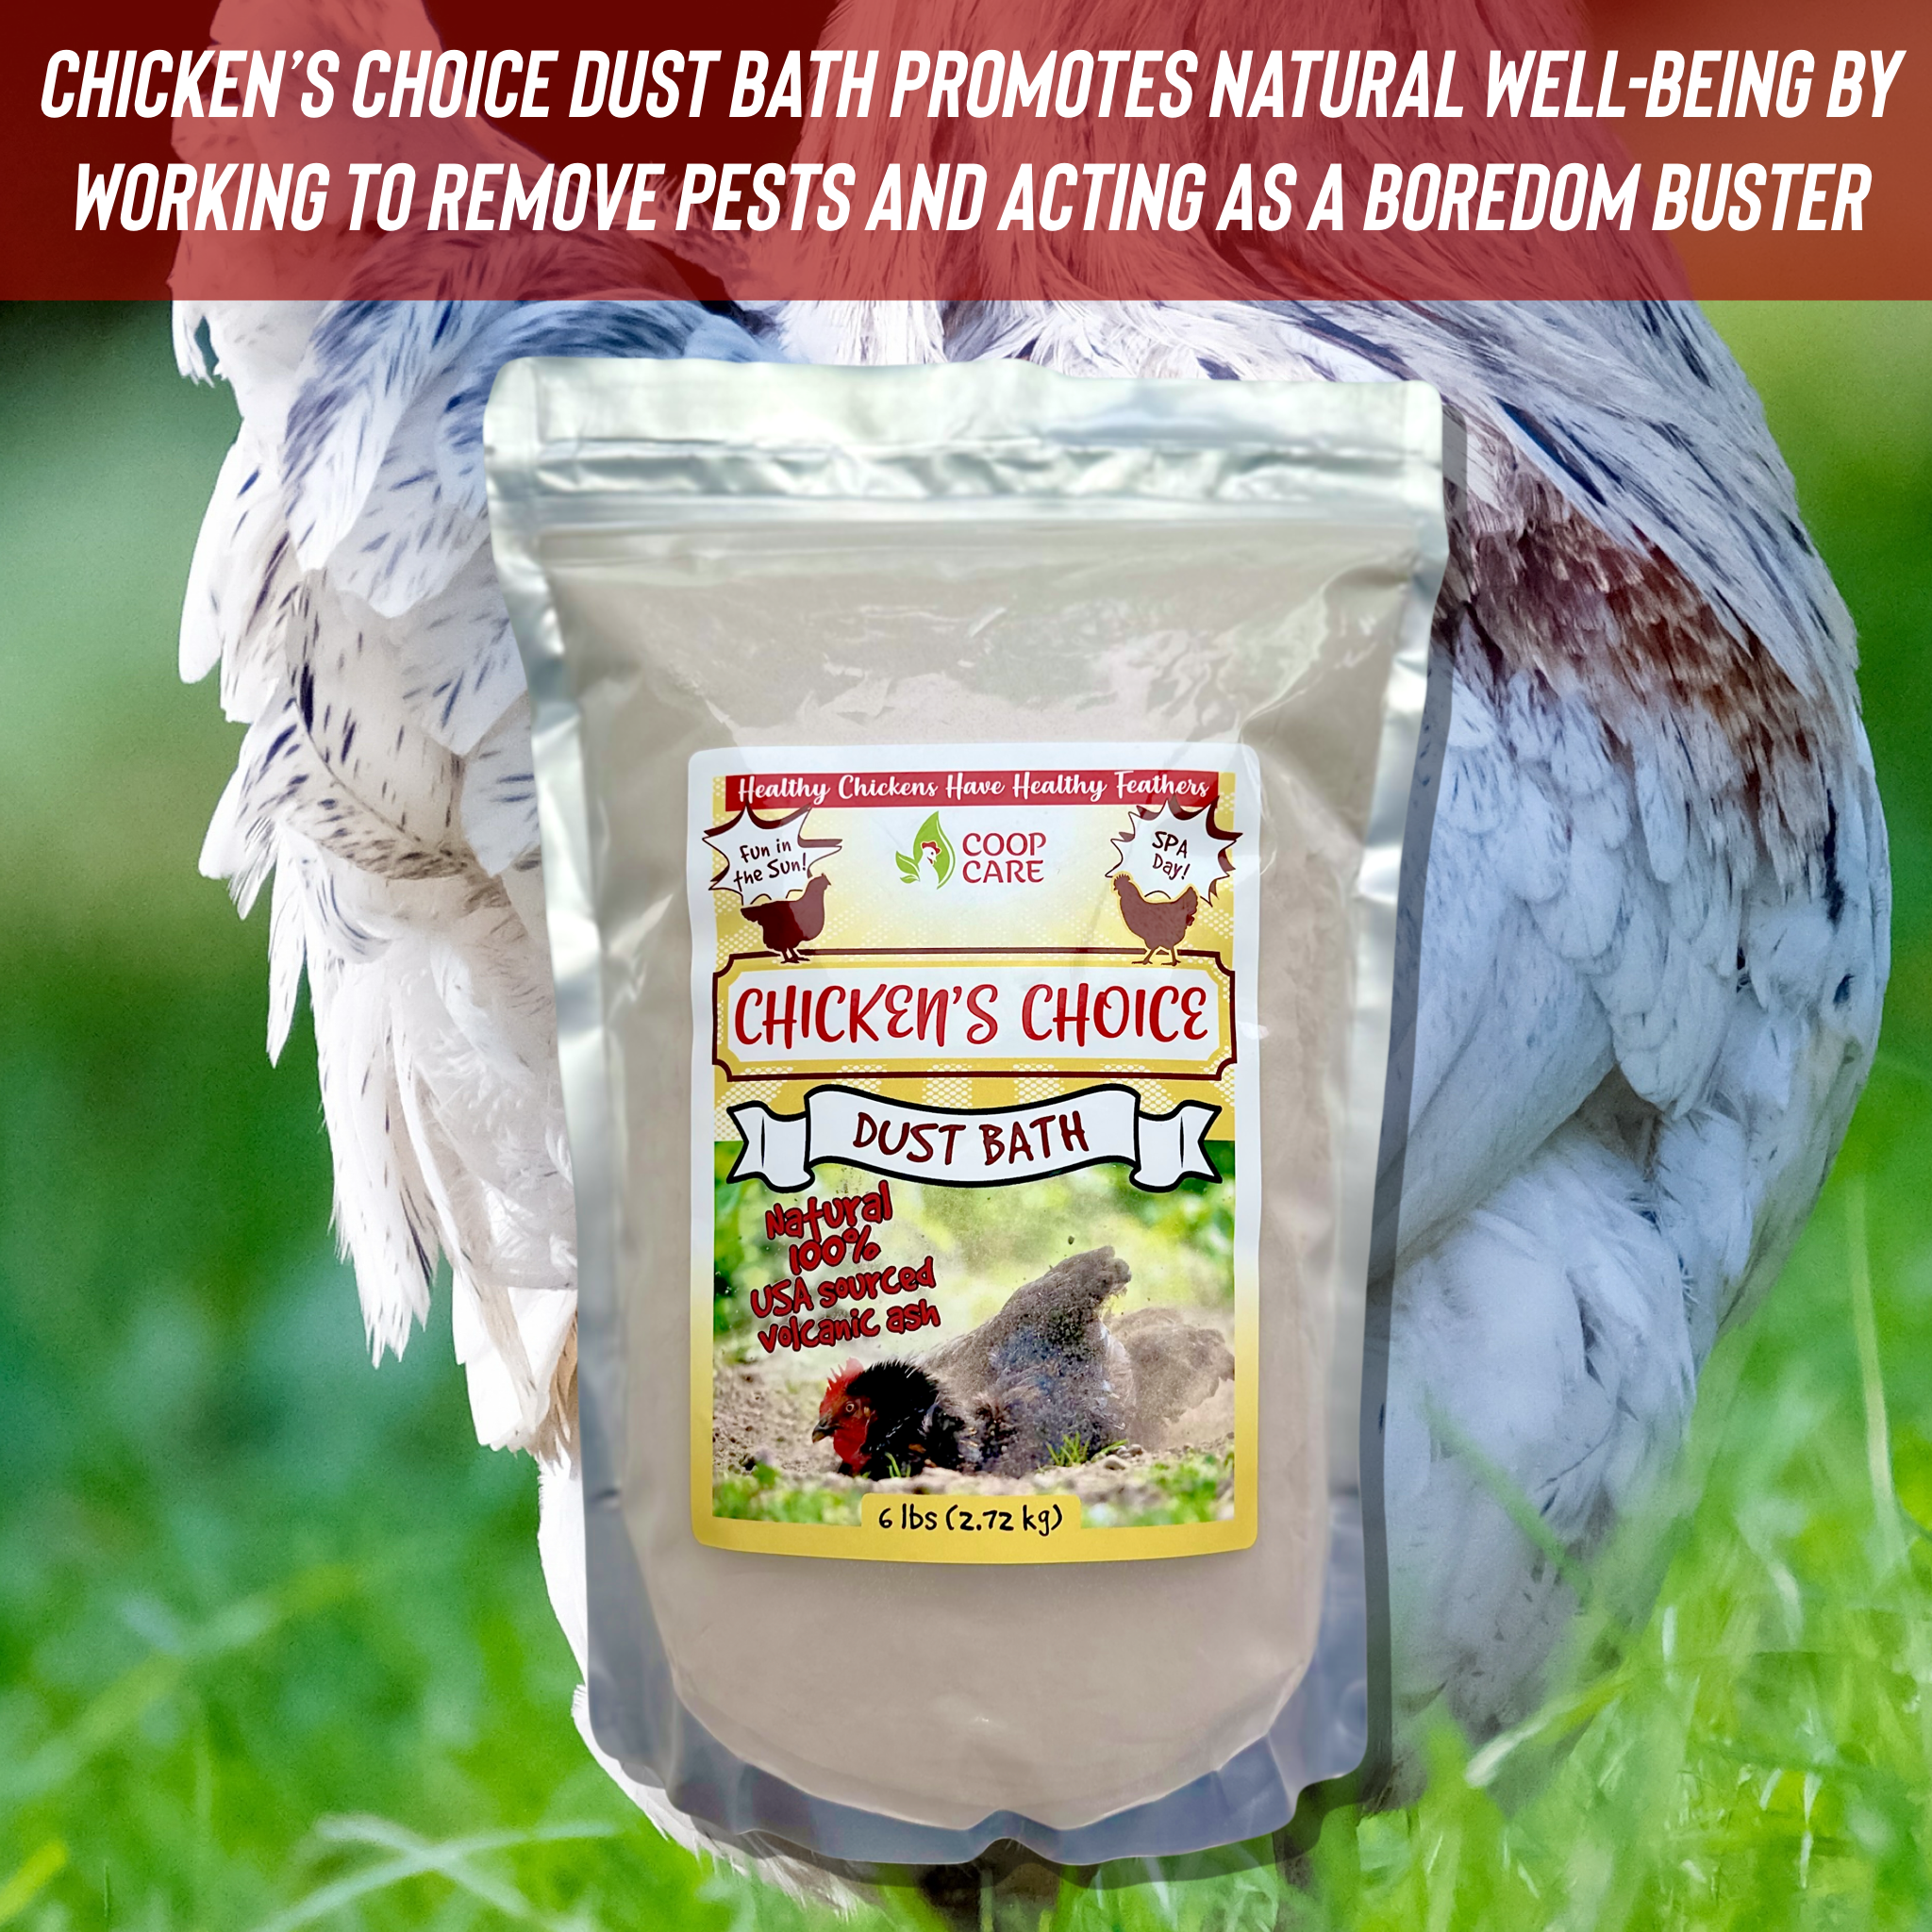 Chicken’s Choice Dust Bath – All-Natural Dust Bath Additive for Chickens and all types of Poultry to Help Remove Excess Oils and Keep Feathers in Tip Top Condition (6lb Resealable Pouch)